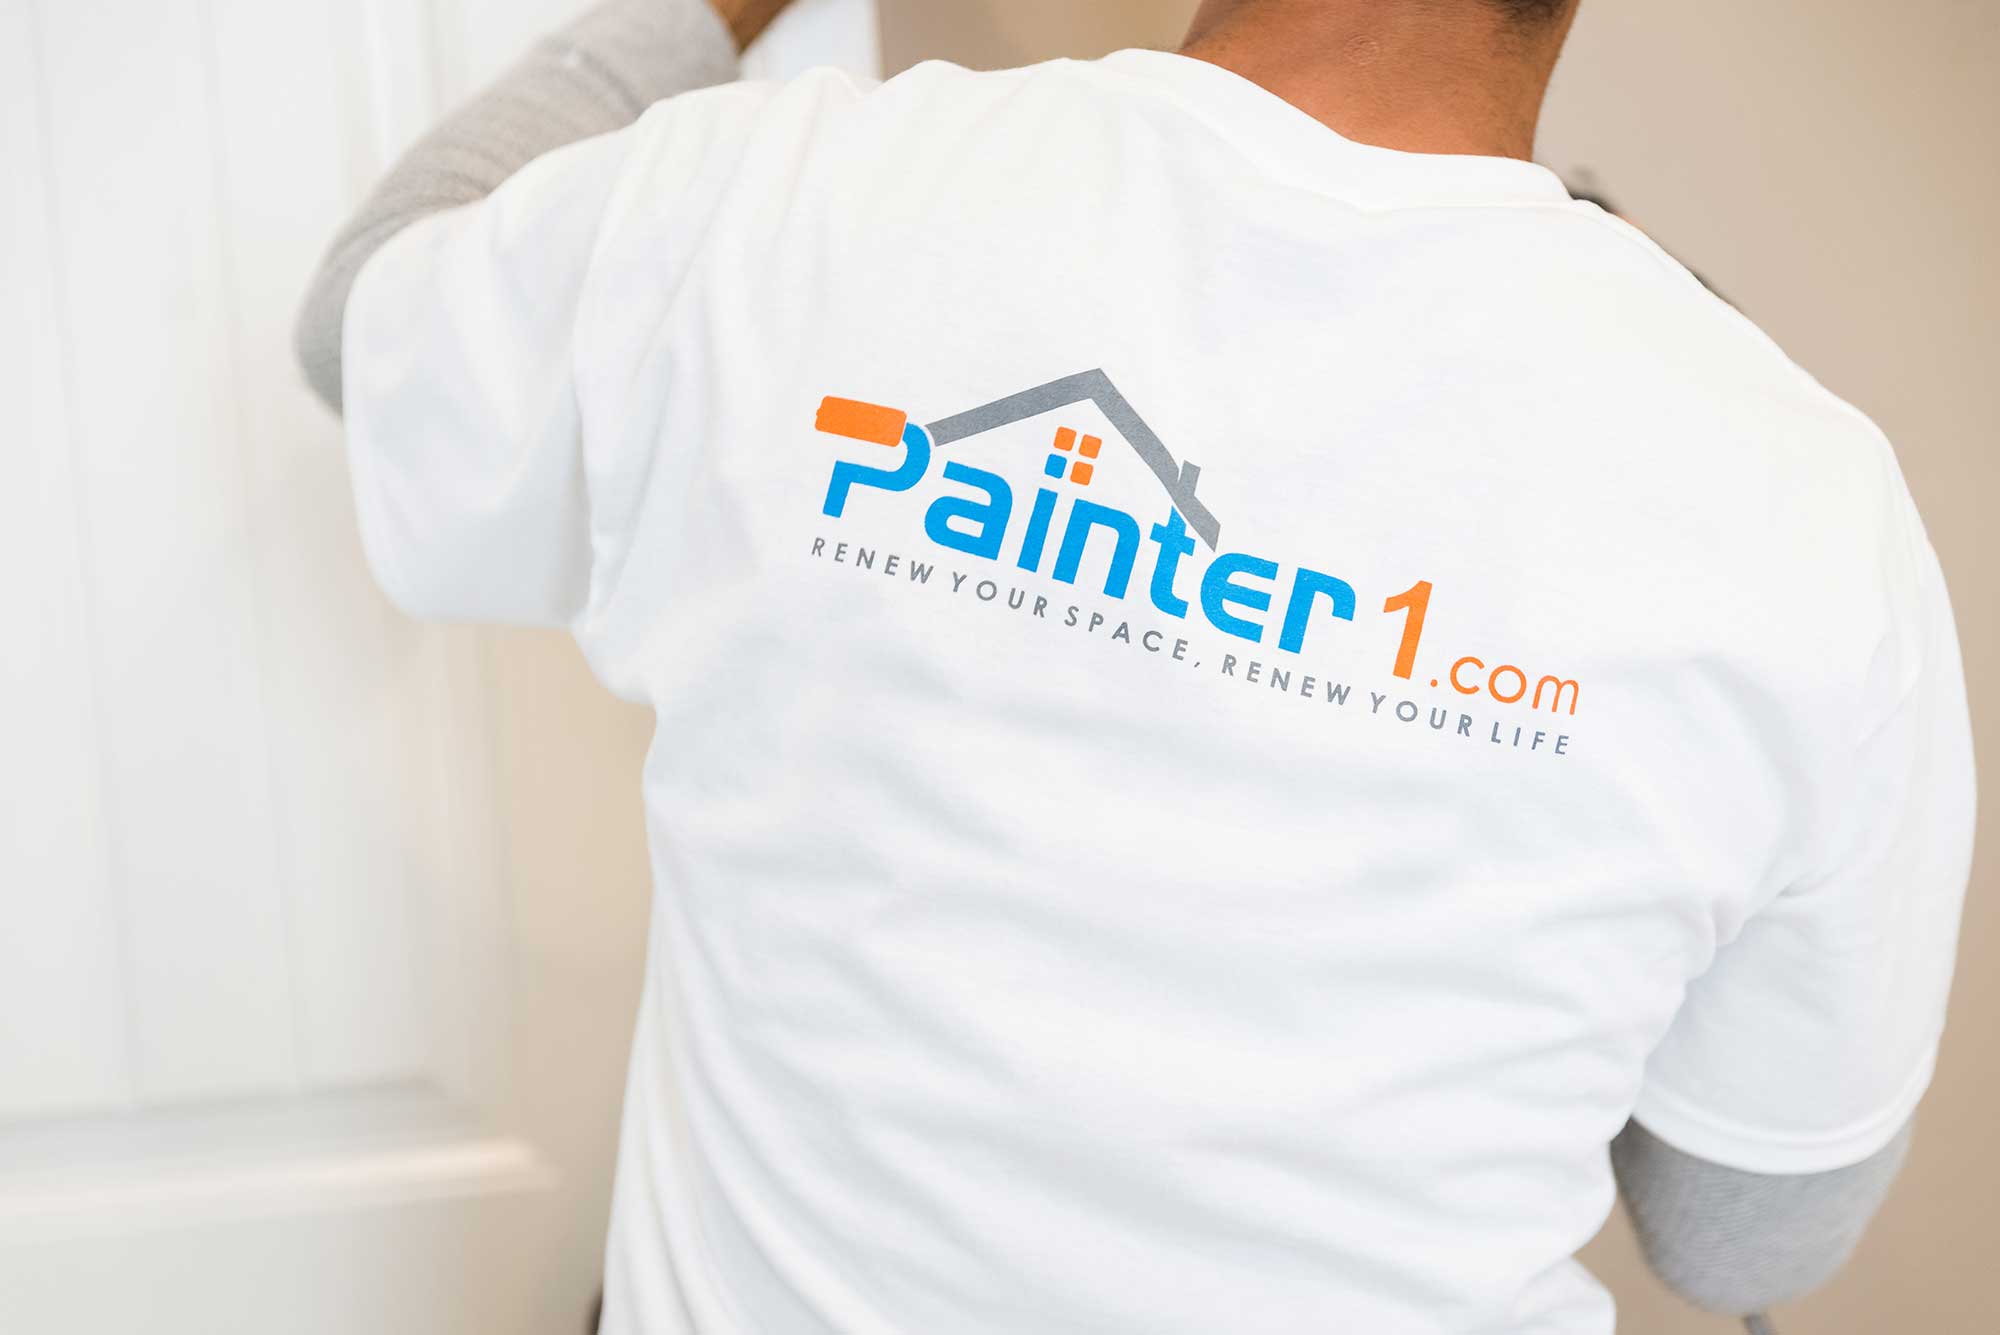 If you are searching for wallpaper removal in Portsmouth / Newburyport, Painter1 offers professional wallpaper removal in Portsmouth / Newburyport.